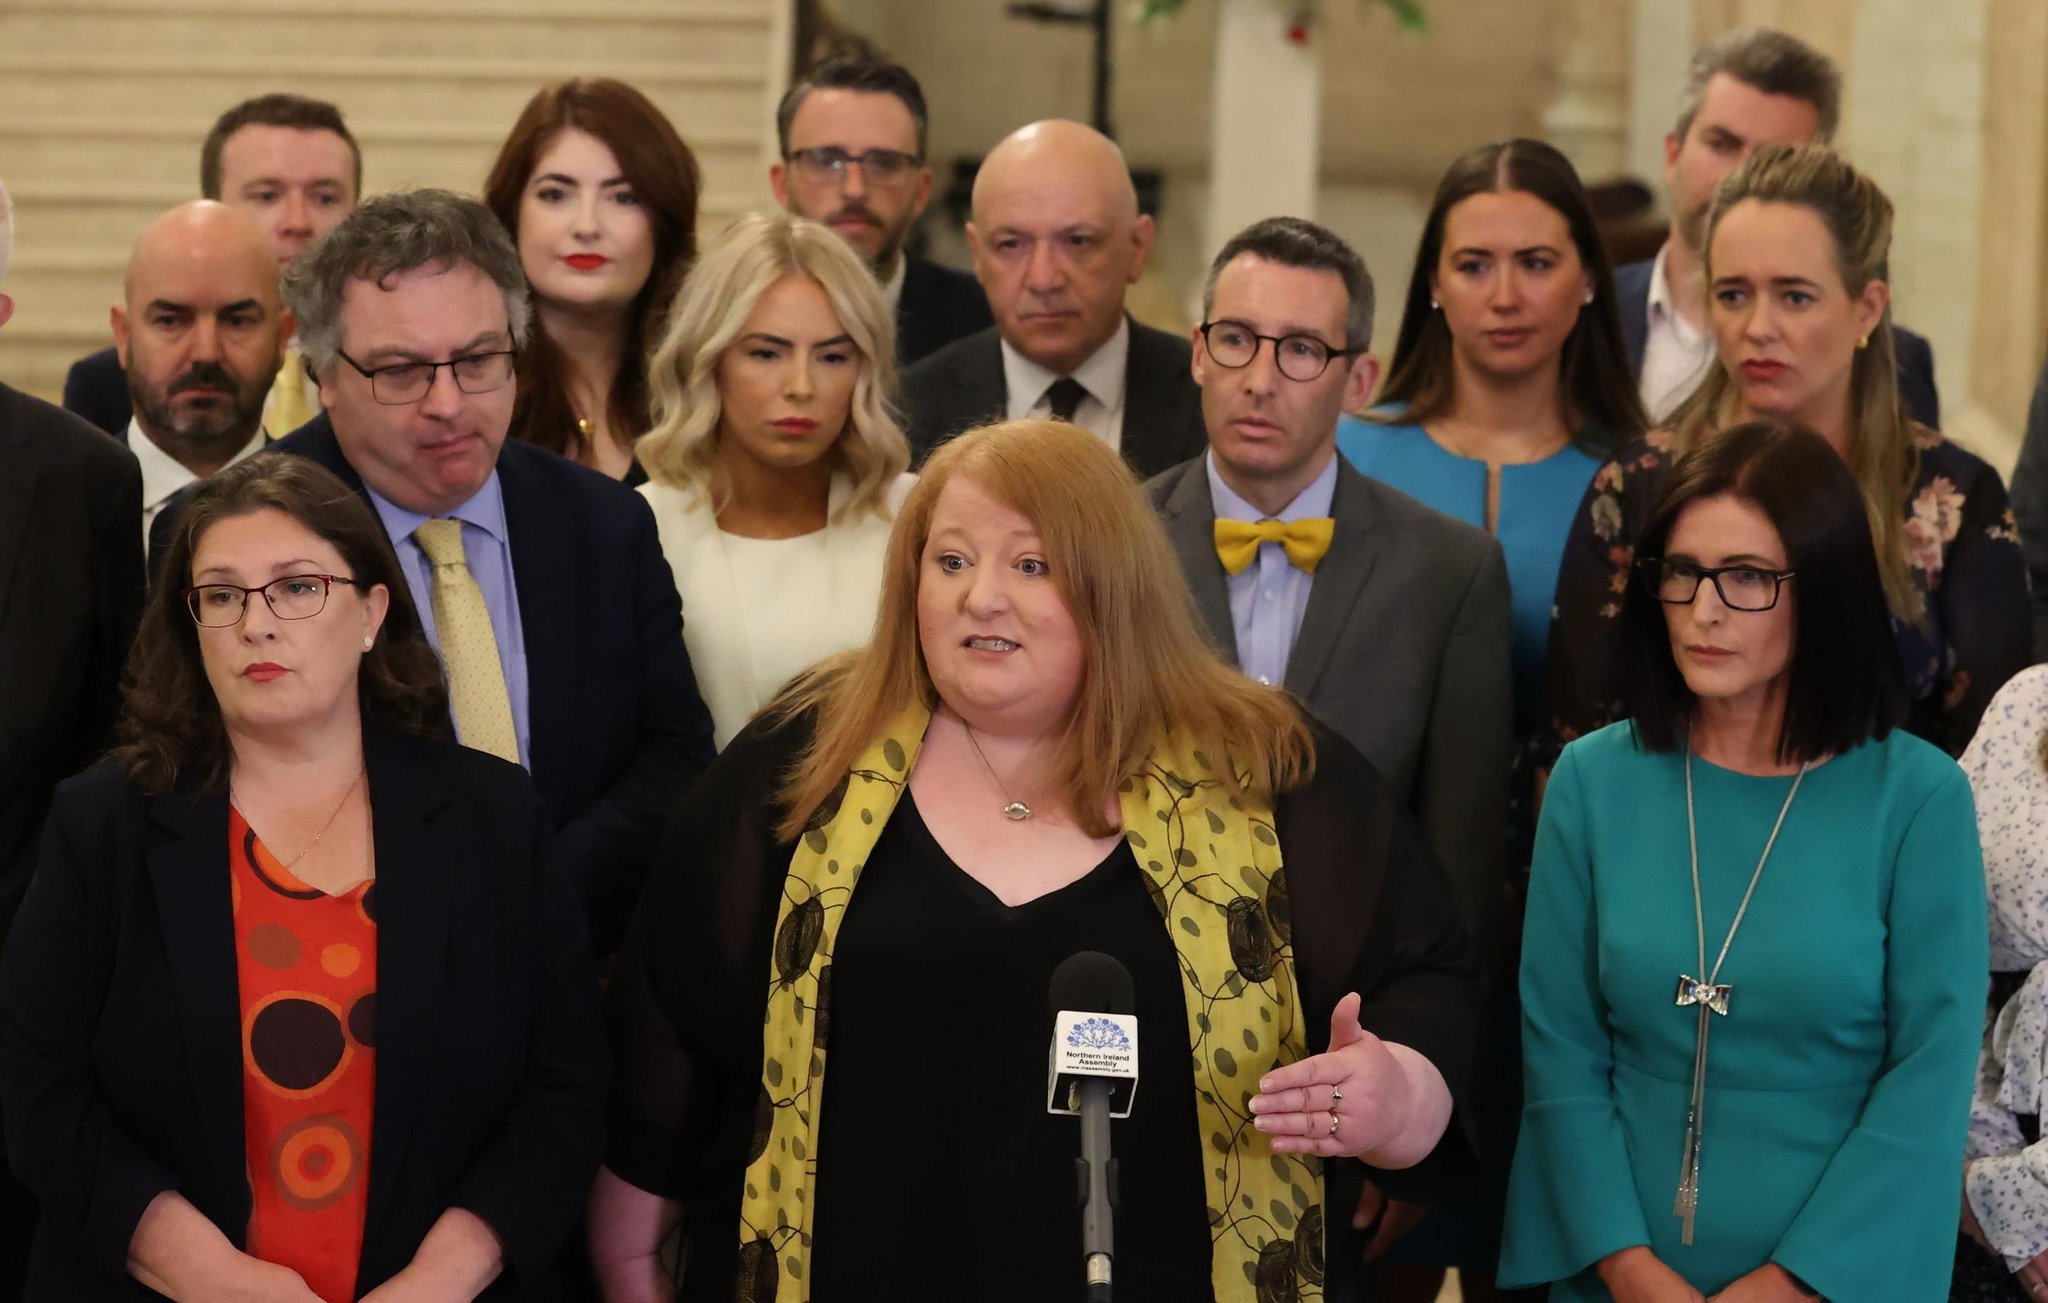 Naomi Long warns DUP 'foolhardy for them to overplay their hand with devolution'